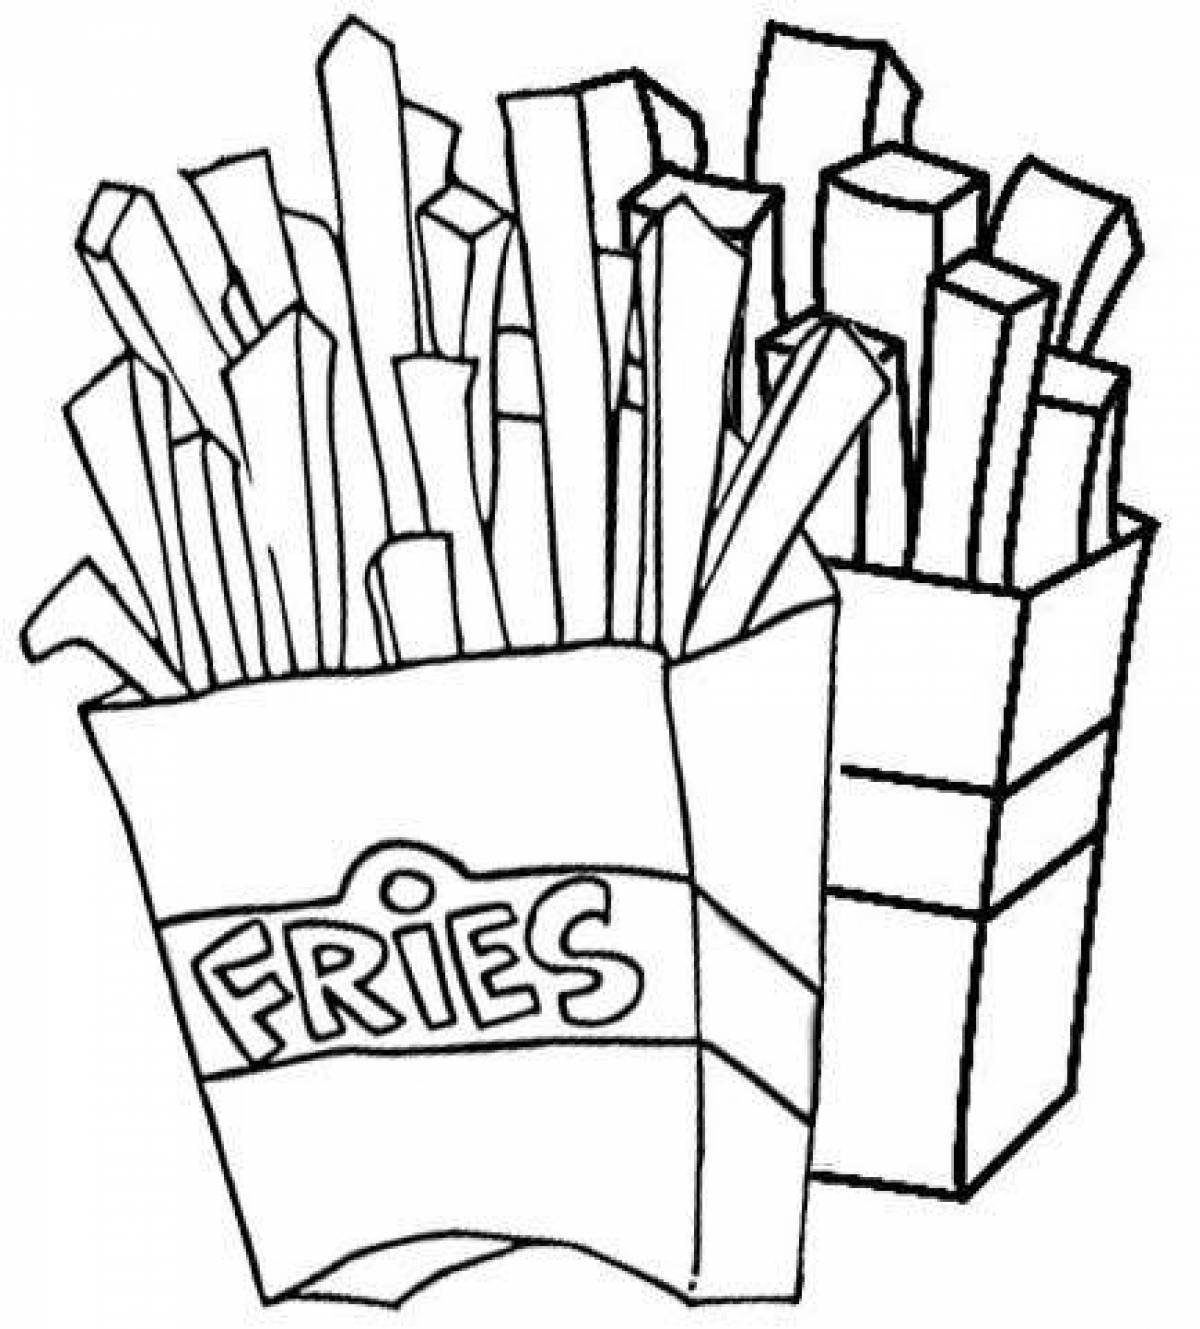 Delicious french fries coloring book